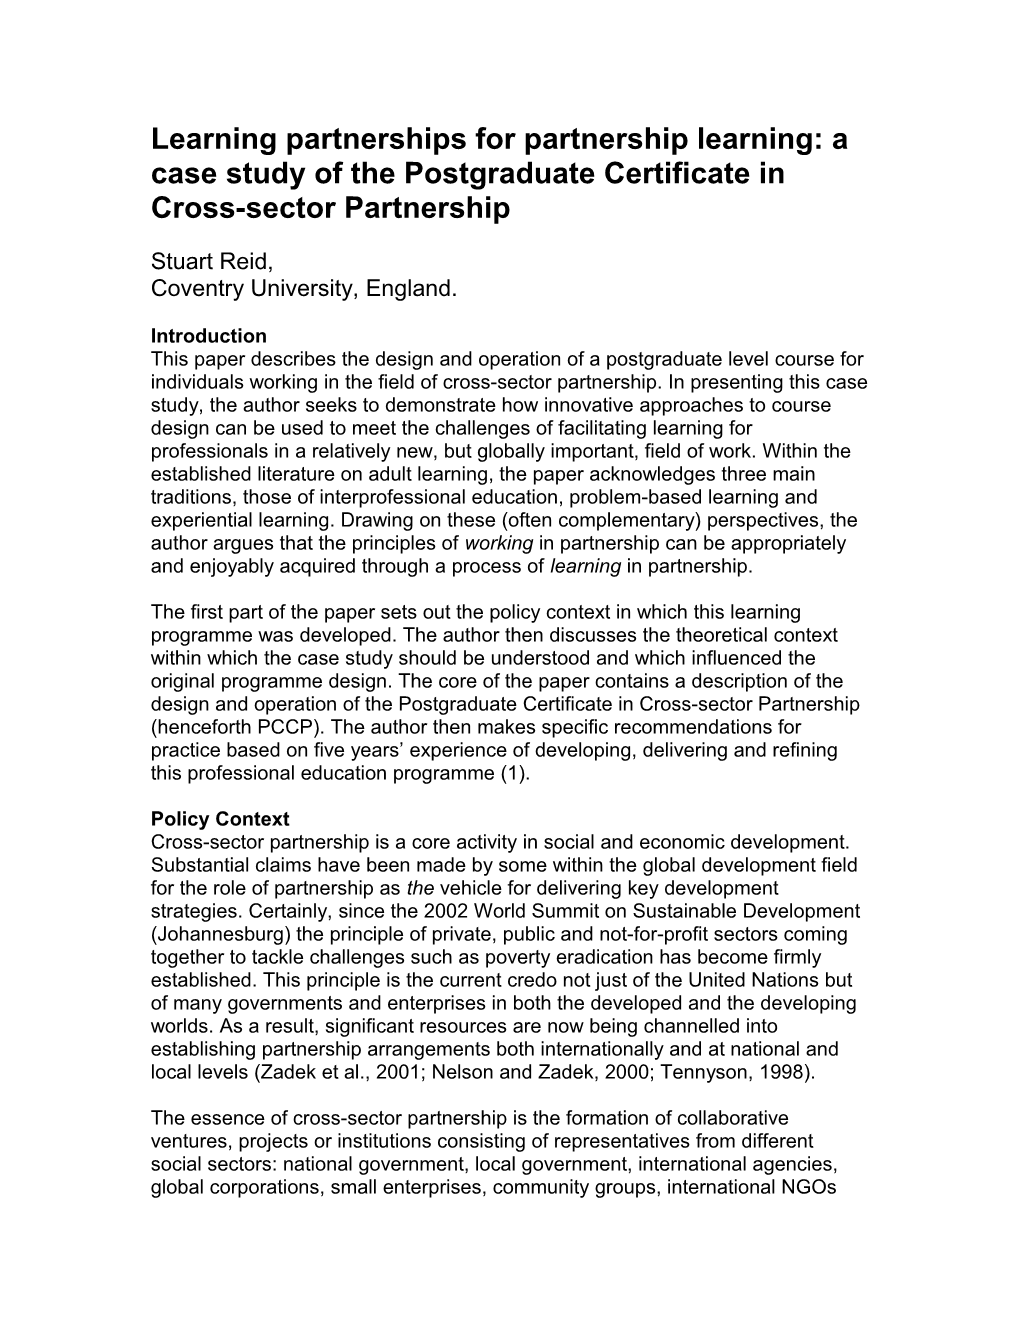 Learning Partnerships for Partnership Learning: a Case Study of the Postgraduate Certificate In